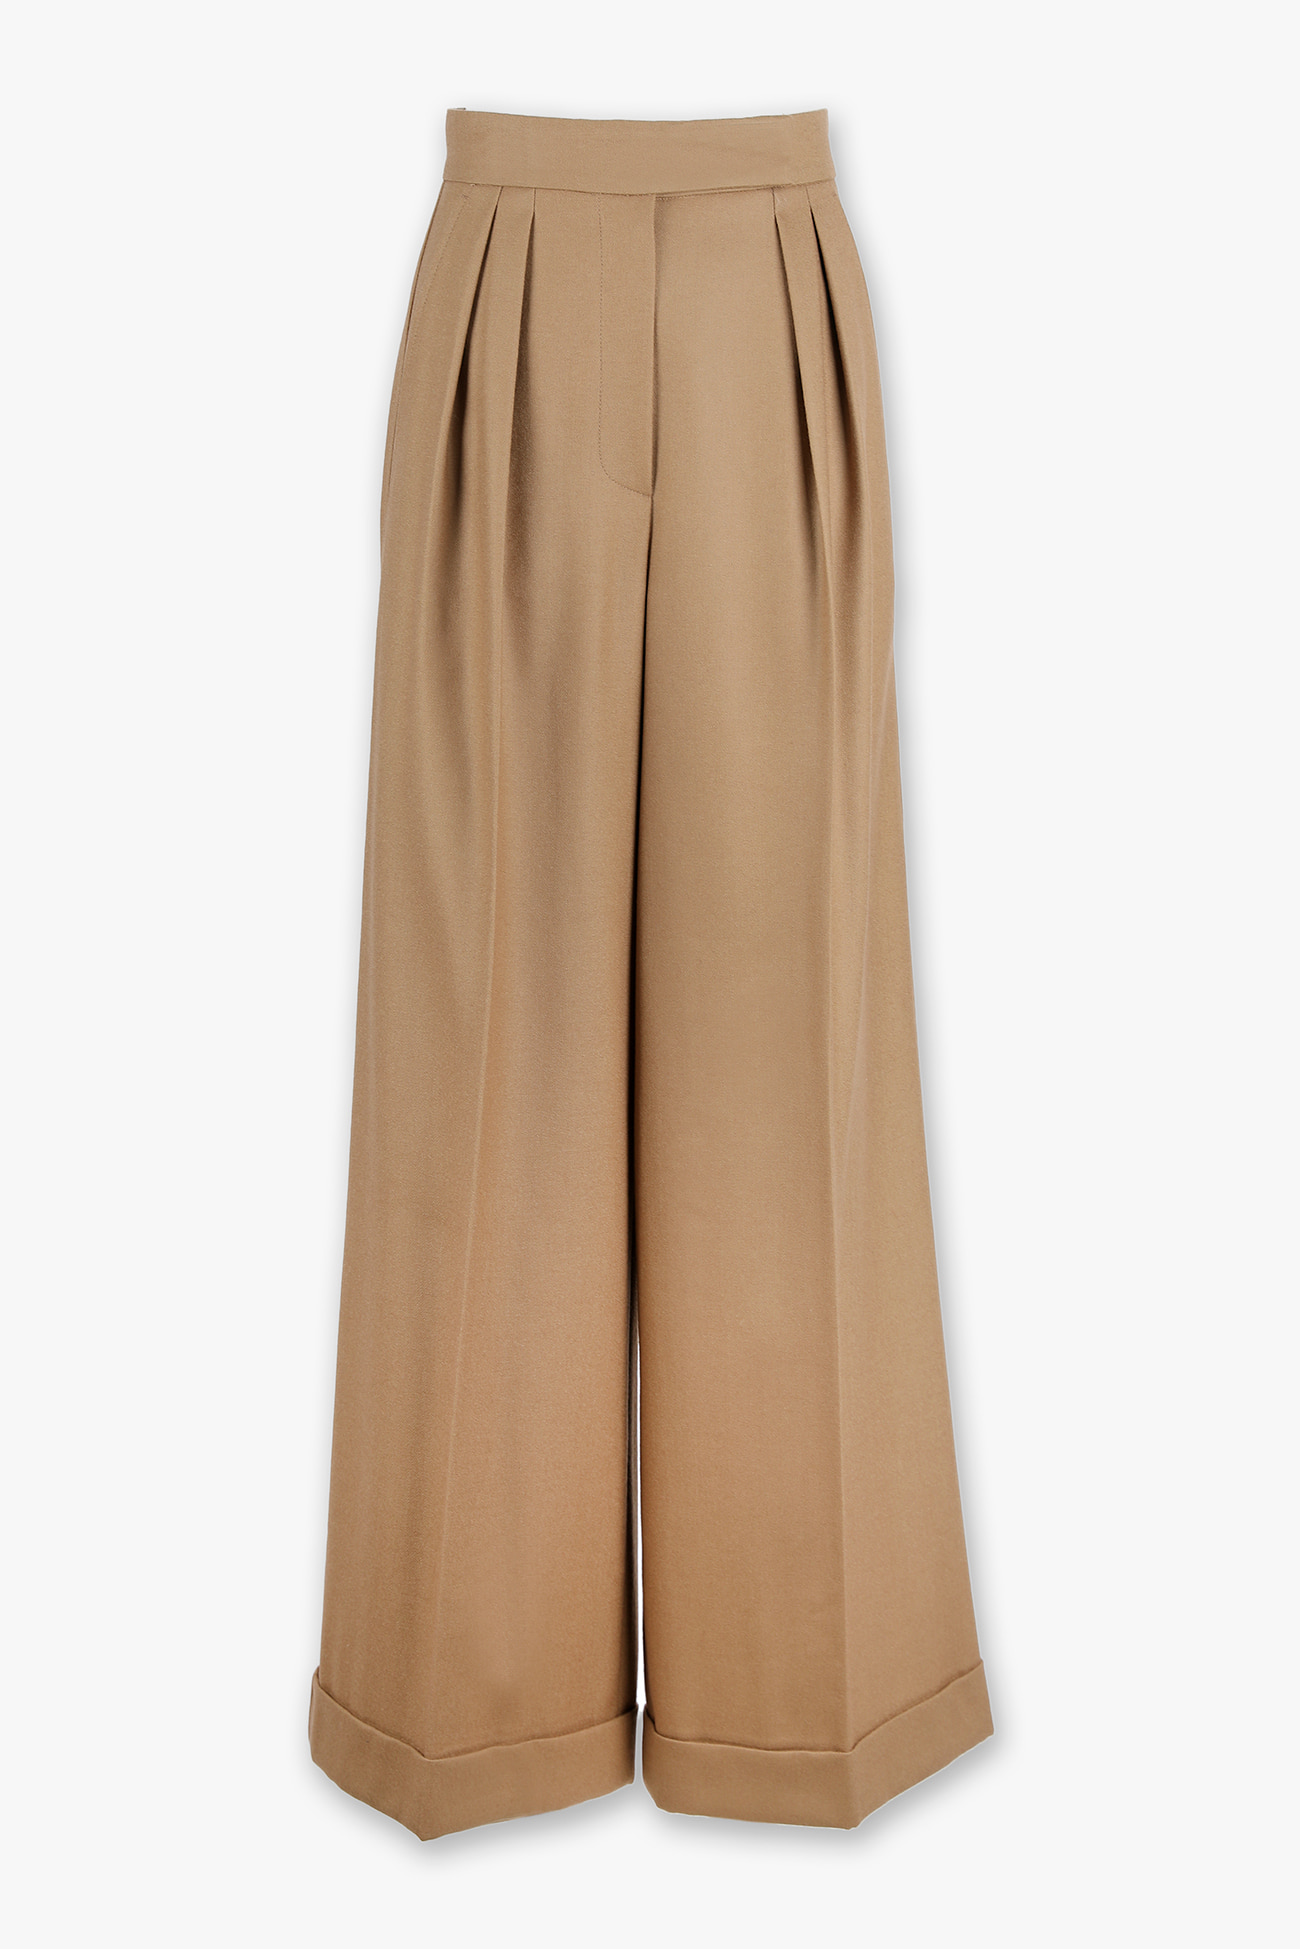 HIGH QUALITY LINE - HIGH END WOOL Wide-leg TROUSERS (CAMEL BEIGE)